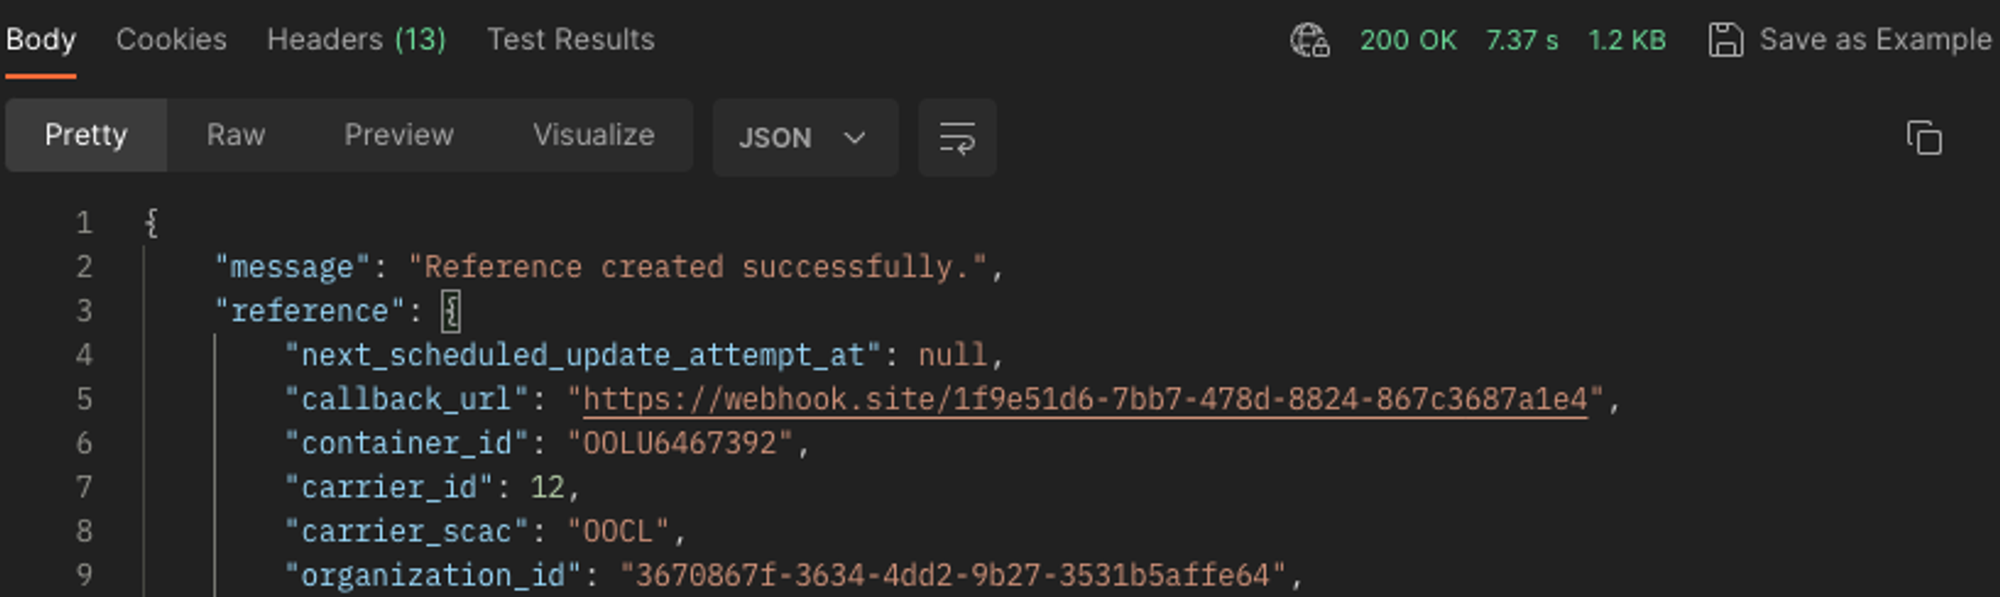 JSON returned with successful POST request in Postman